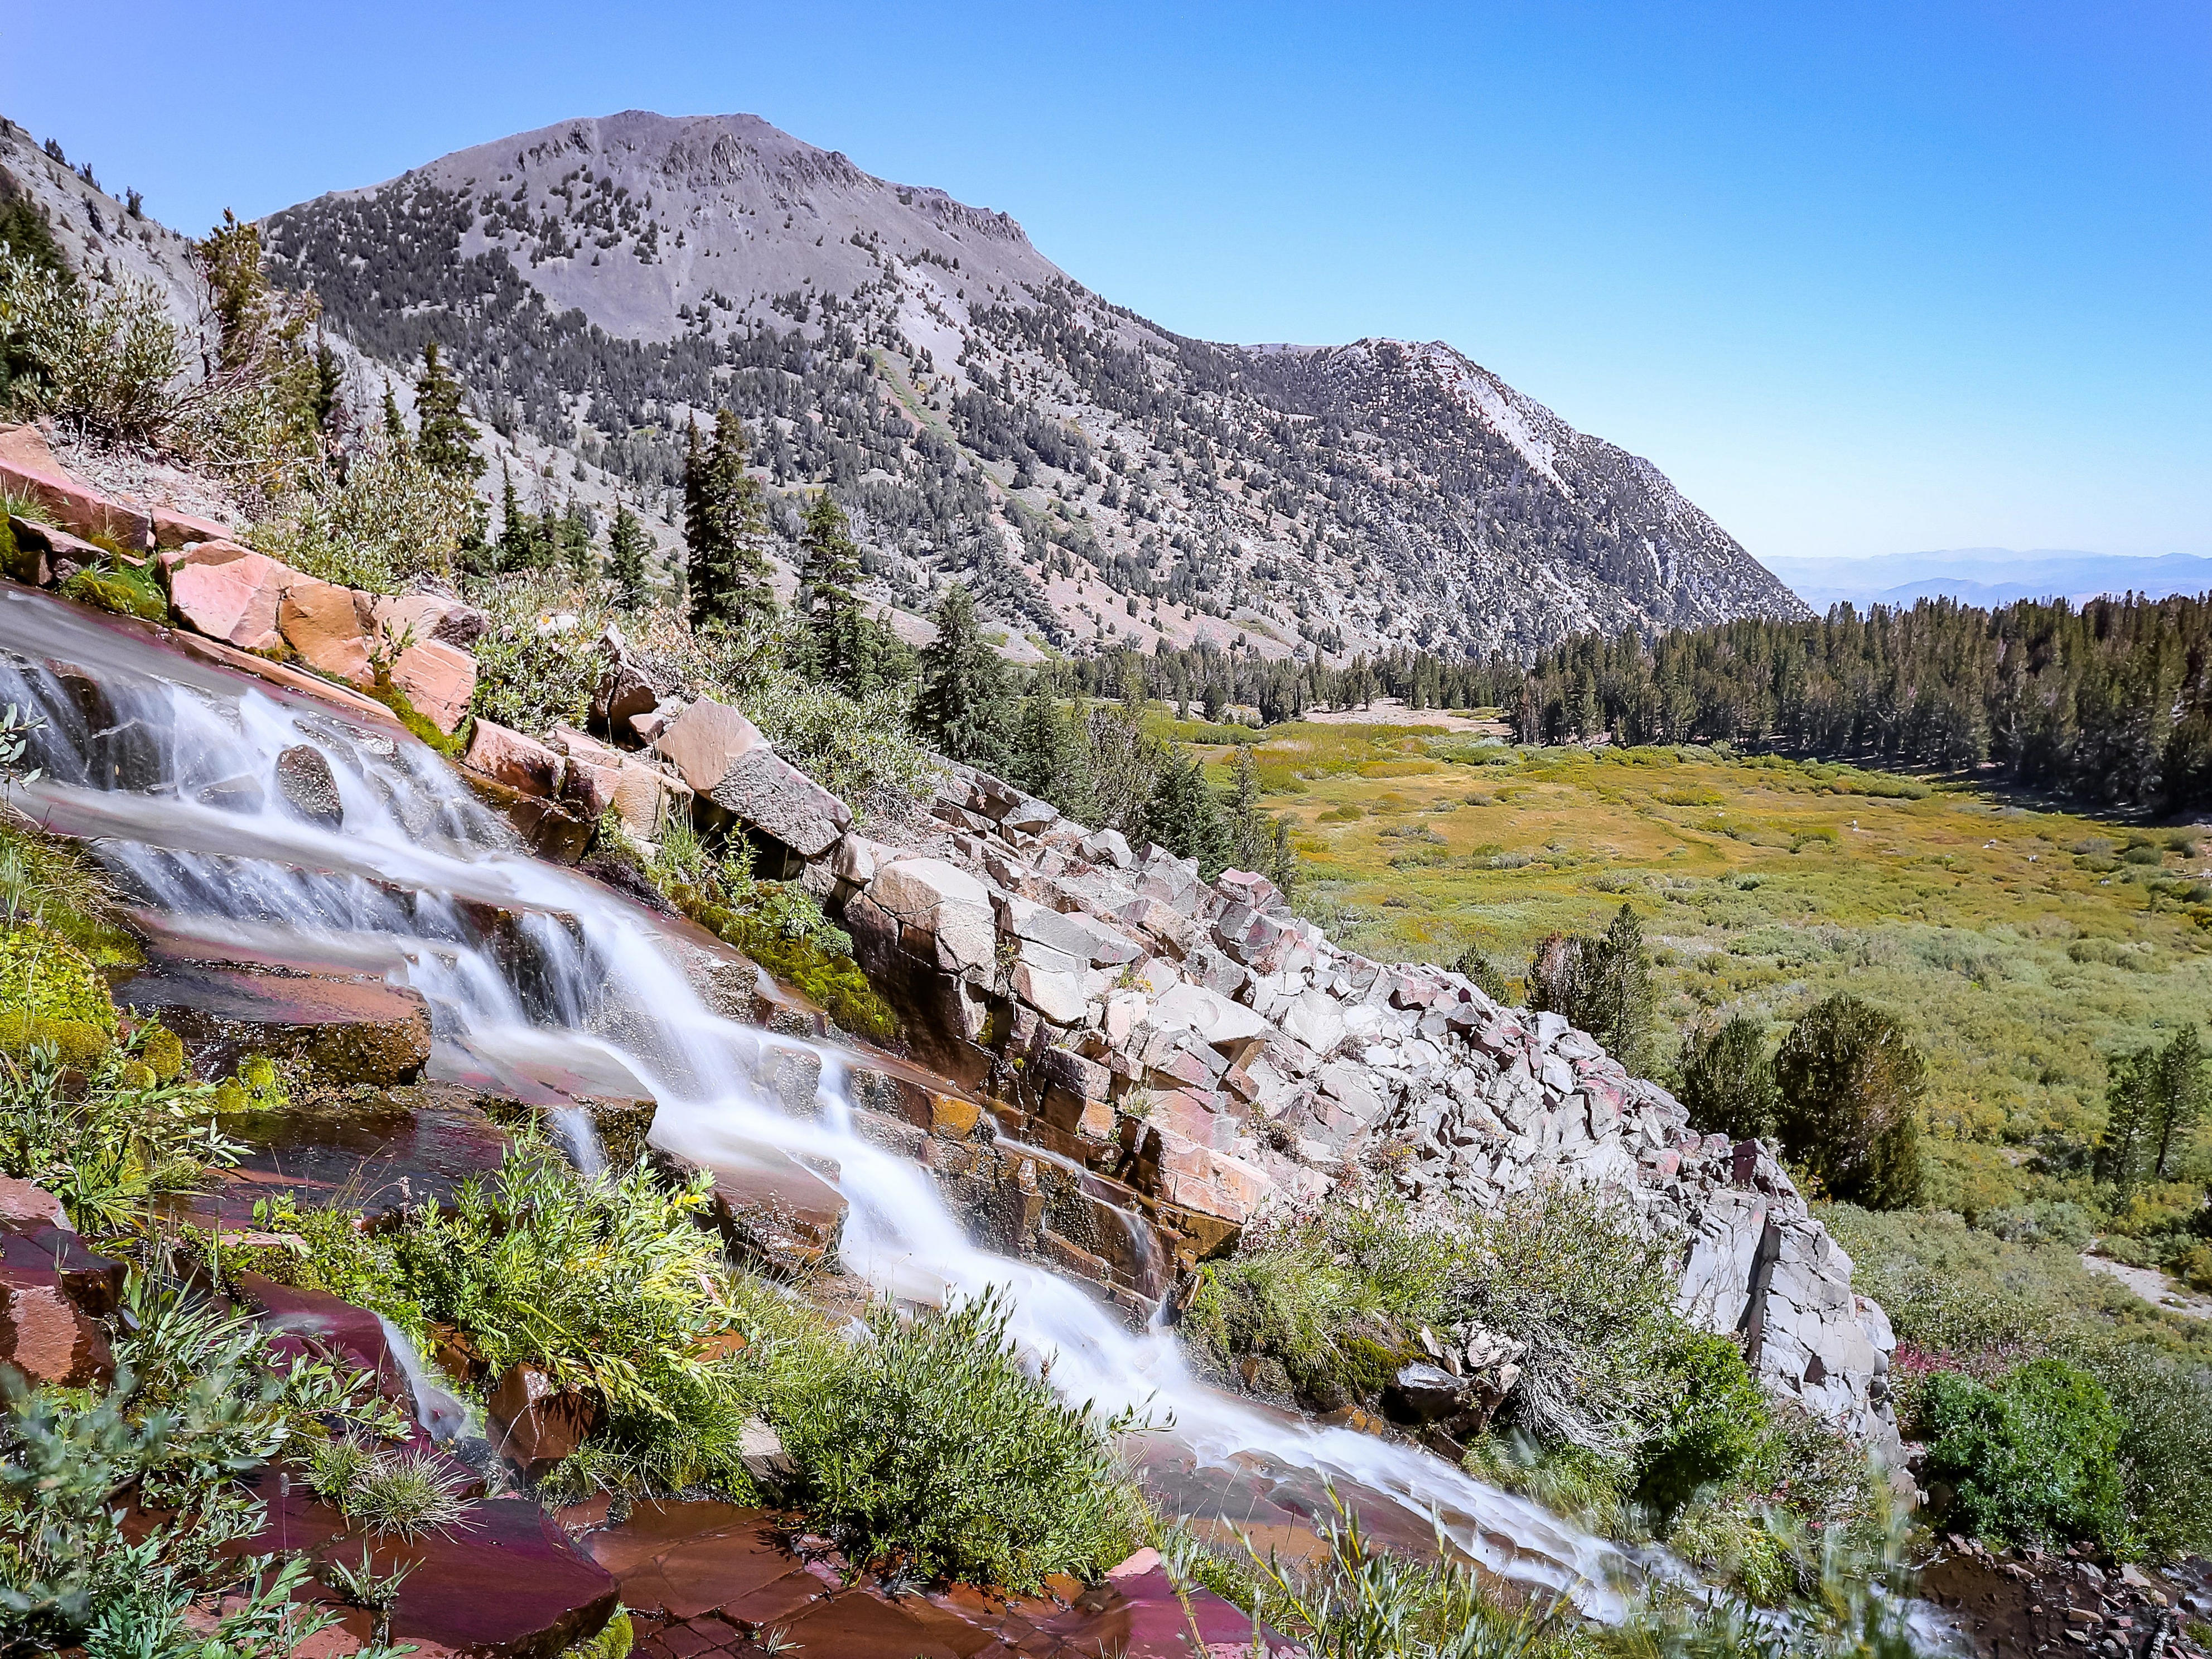 <p>What makes this hike particularly special is that you not only get to take in the splendor of <a href="https://tahoetrailguide.com/hiking-mount-rose/">Lake Tahoe</a>, but also you'll get views of Reno and the surrounding Sierra Nevadas.</p><p>The summit is the highest peak on the north side of the lake, and it is listed as <a href="https://thetahoeweekly.com/2018/10/top-20-tahoe-fall-adventures/">one of Tahoe Weekly's top 20 fall adventures</a>.</p><p>You'll work for these views, with nearly 11 miles of trail and an elevation gain of 2,400 feet.</p>